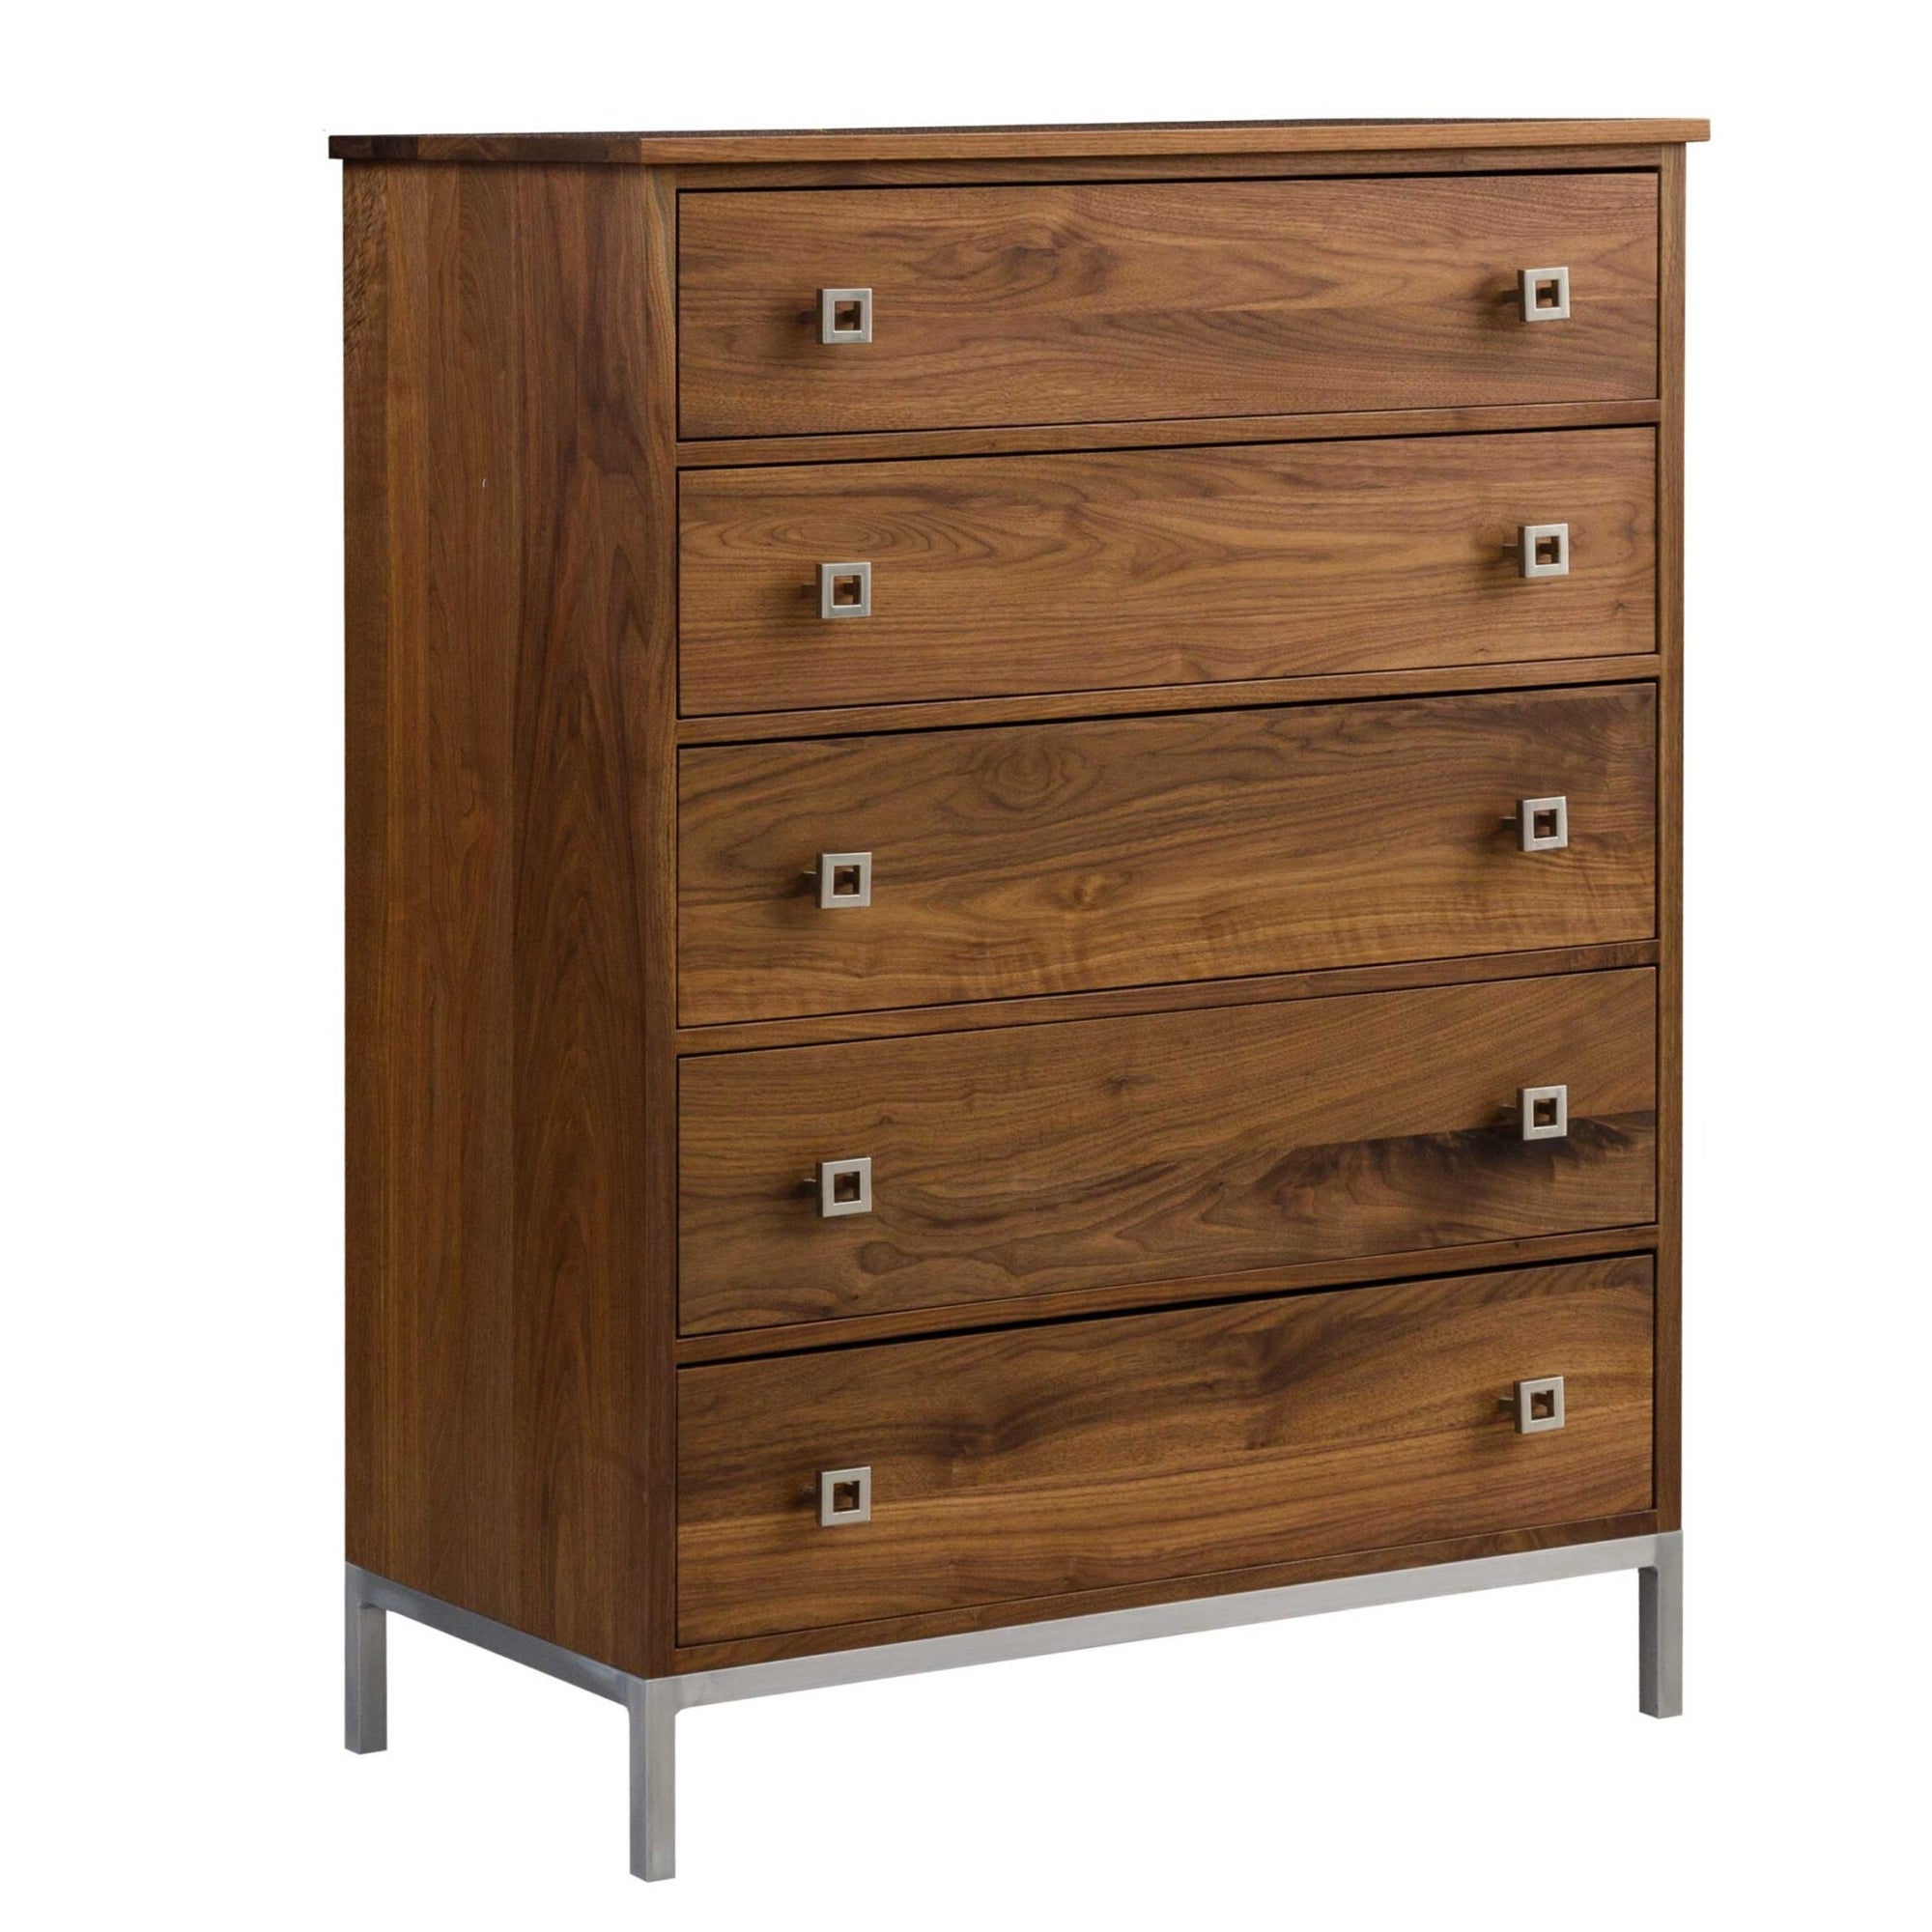 Amish Danish Chest of Drawers - snyders.furniture